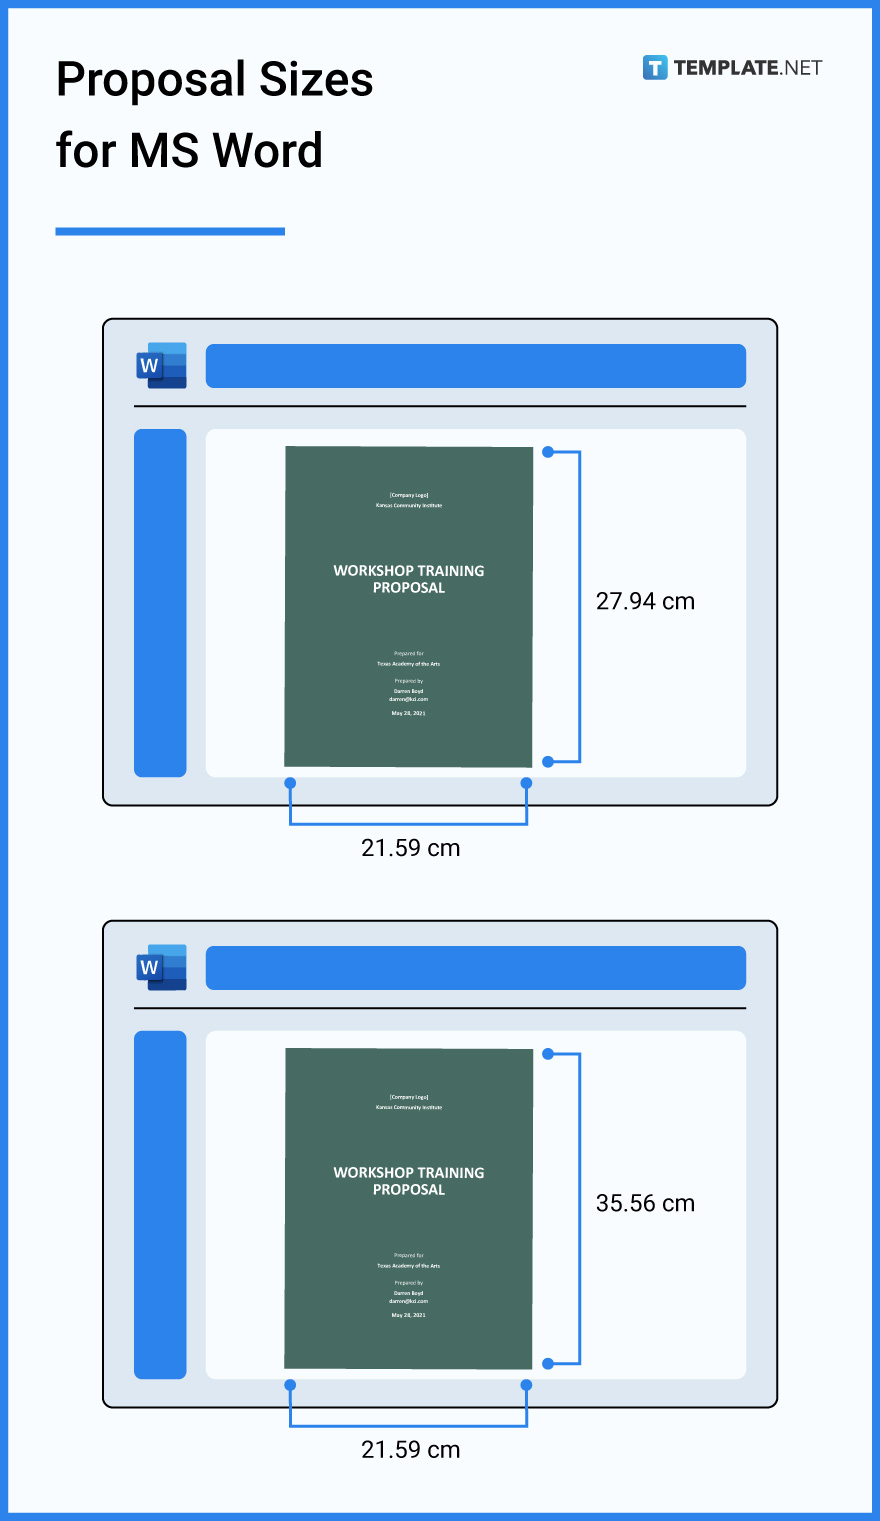 proposal-sizes-for-ms-word